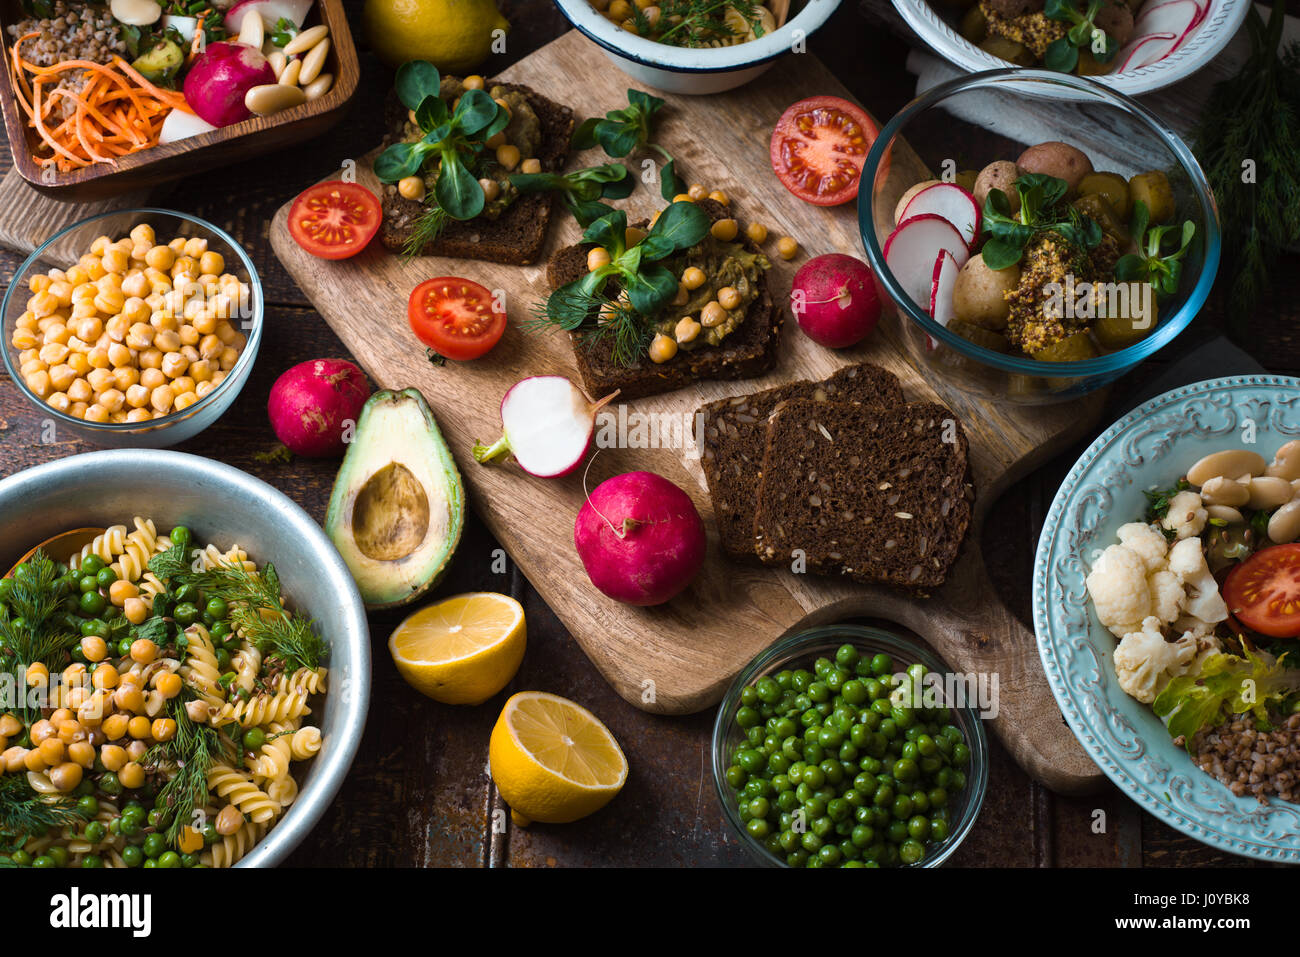 Different salad and snack on the wooden table horizontal Stock Photo